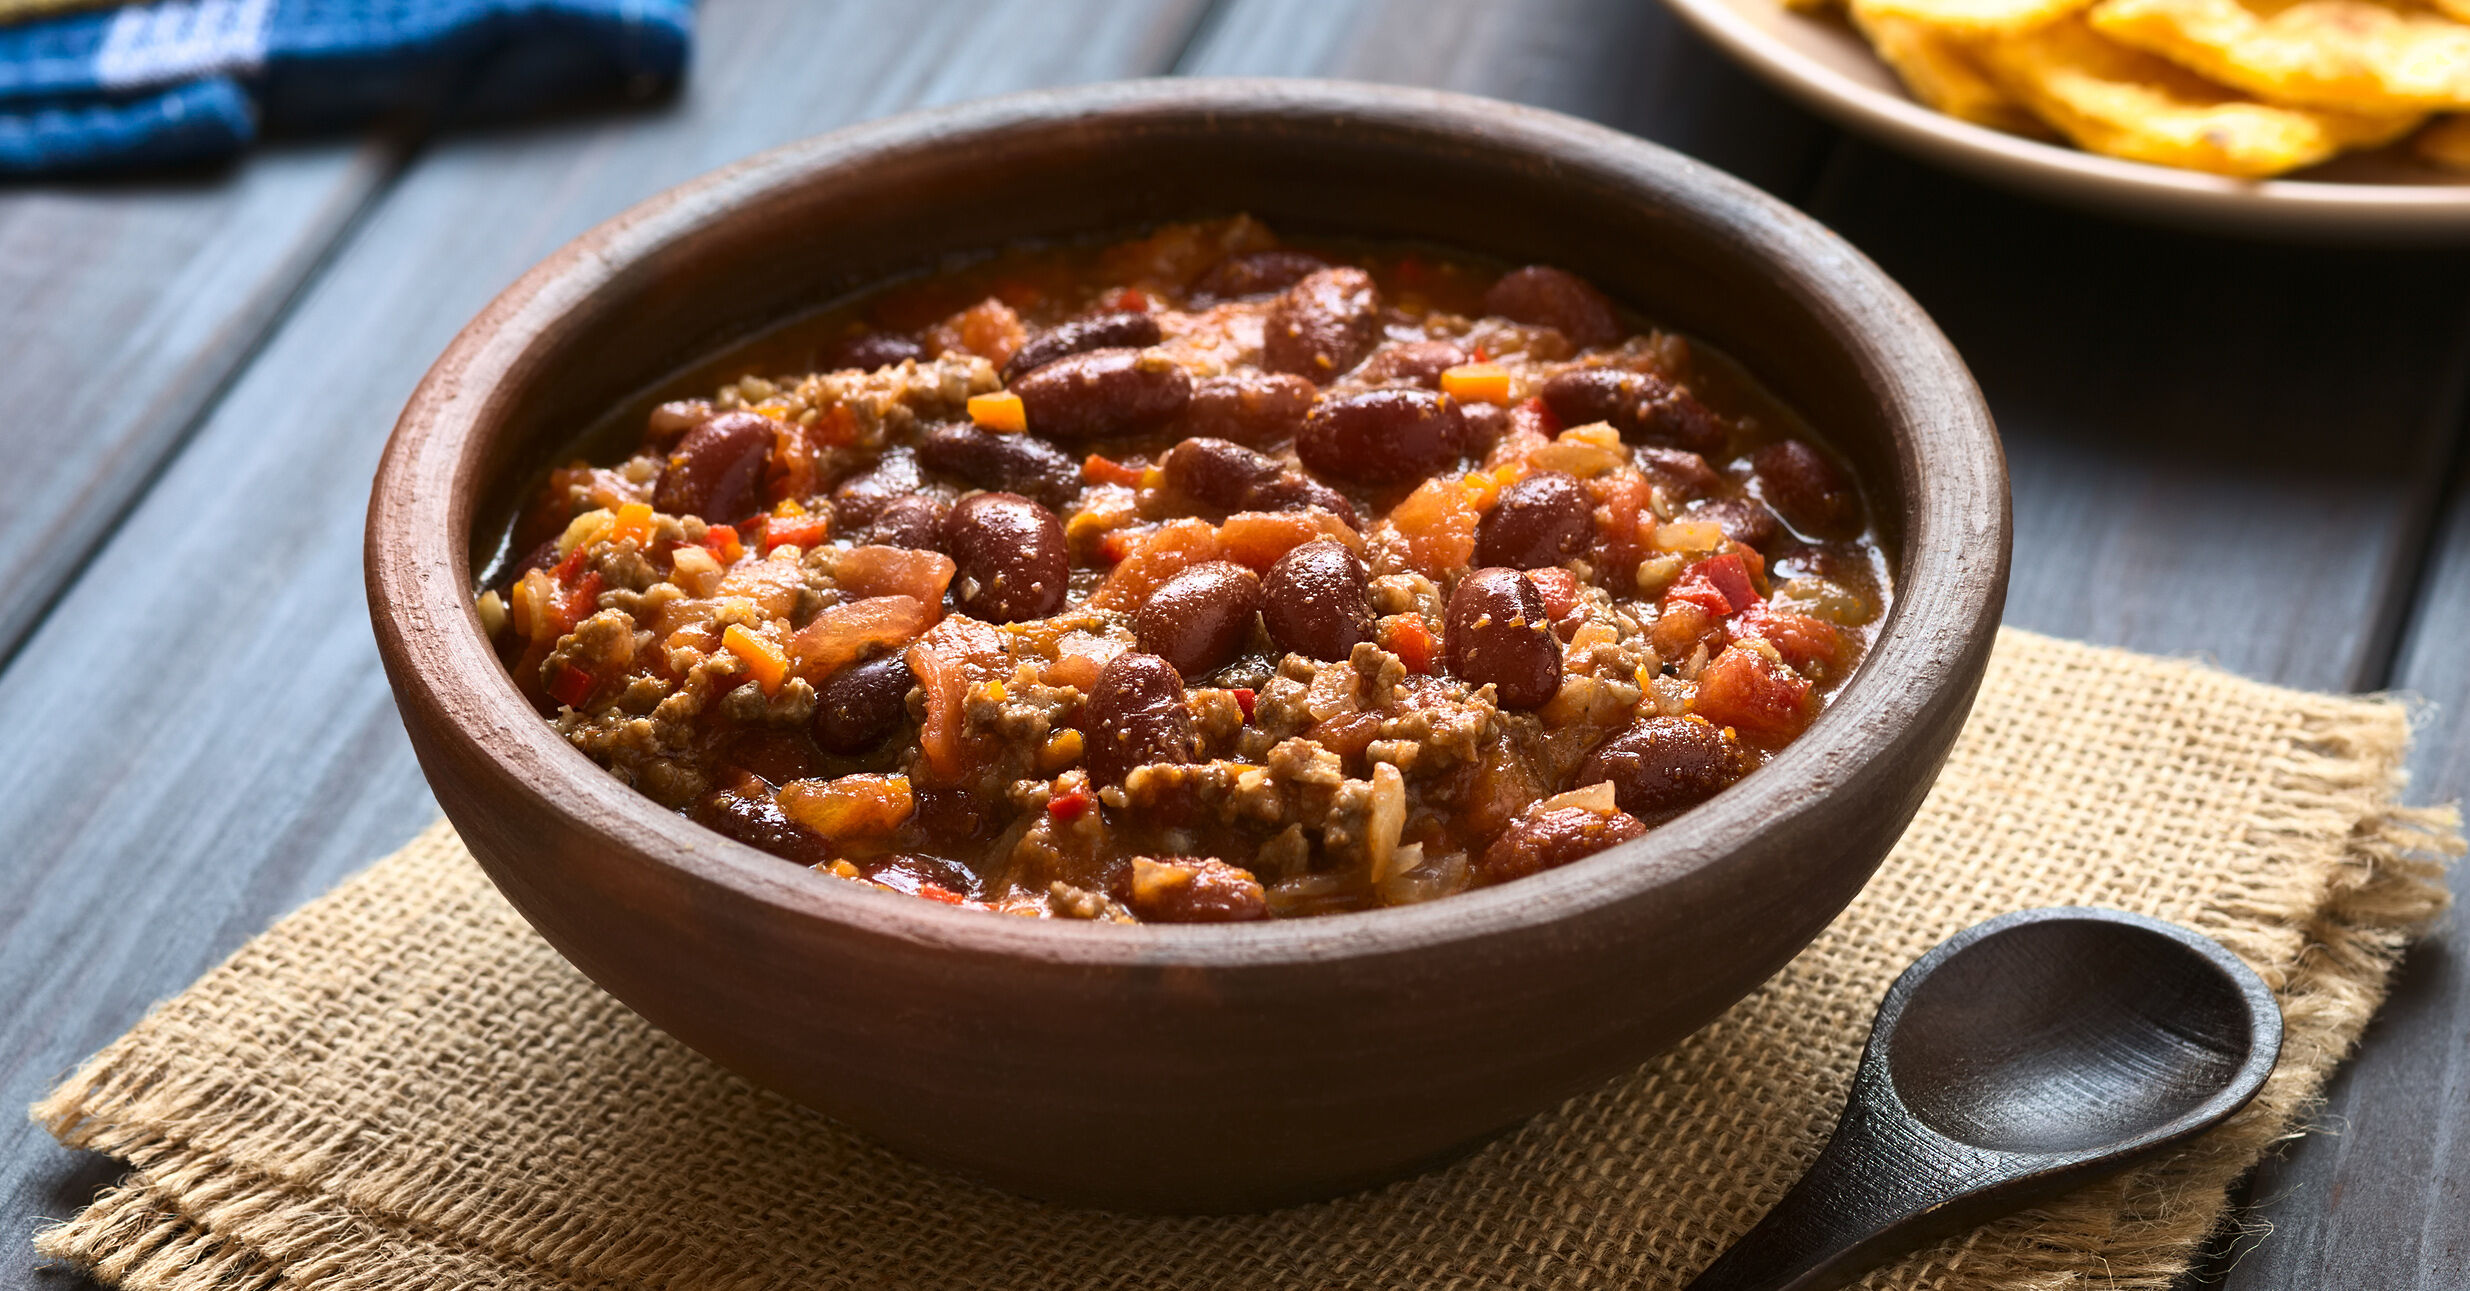 Wood bowl of Chili on a linen placemat